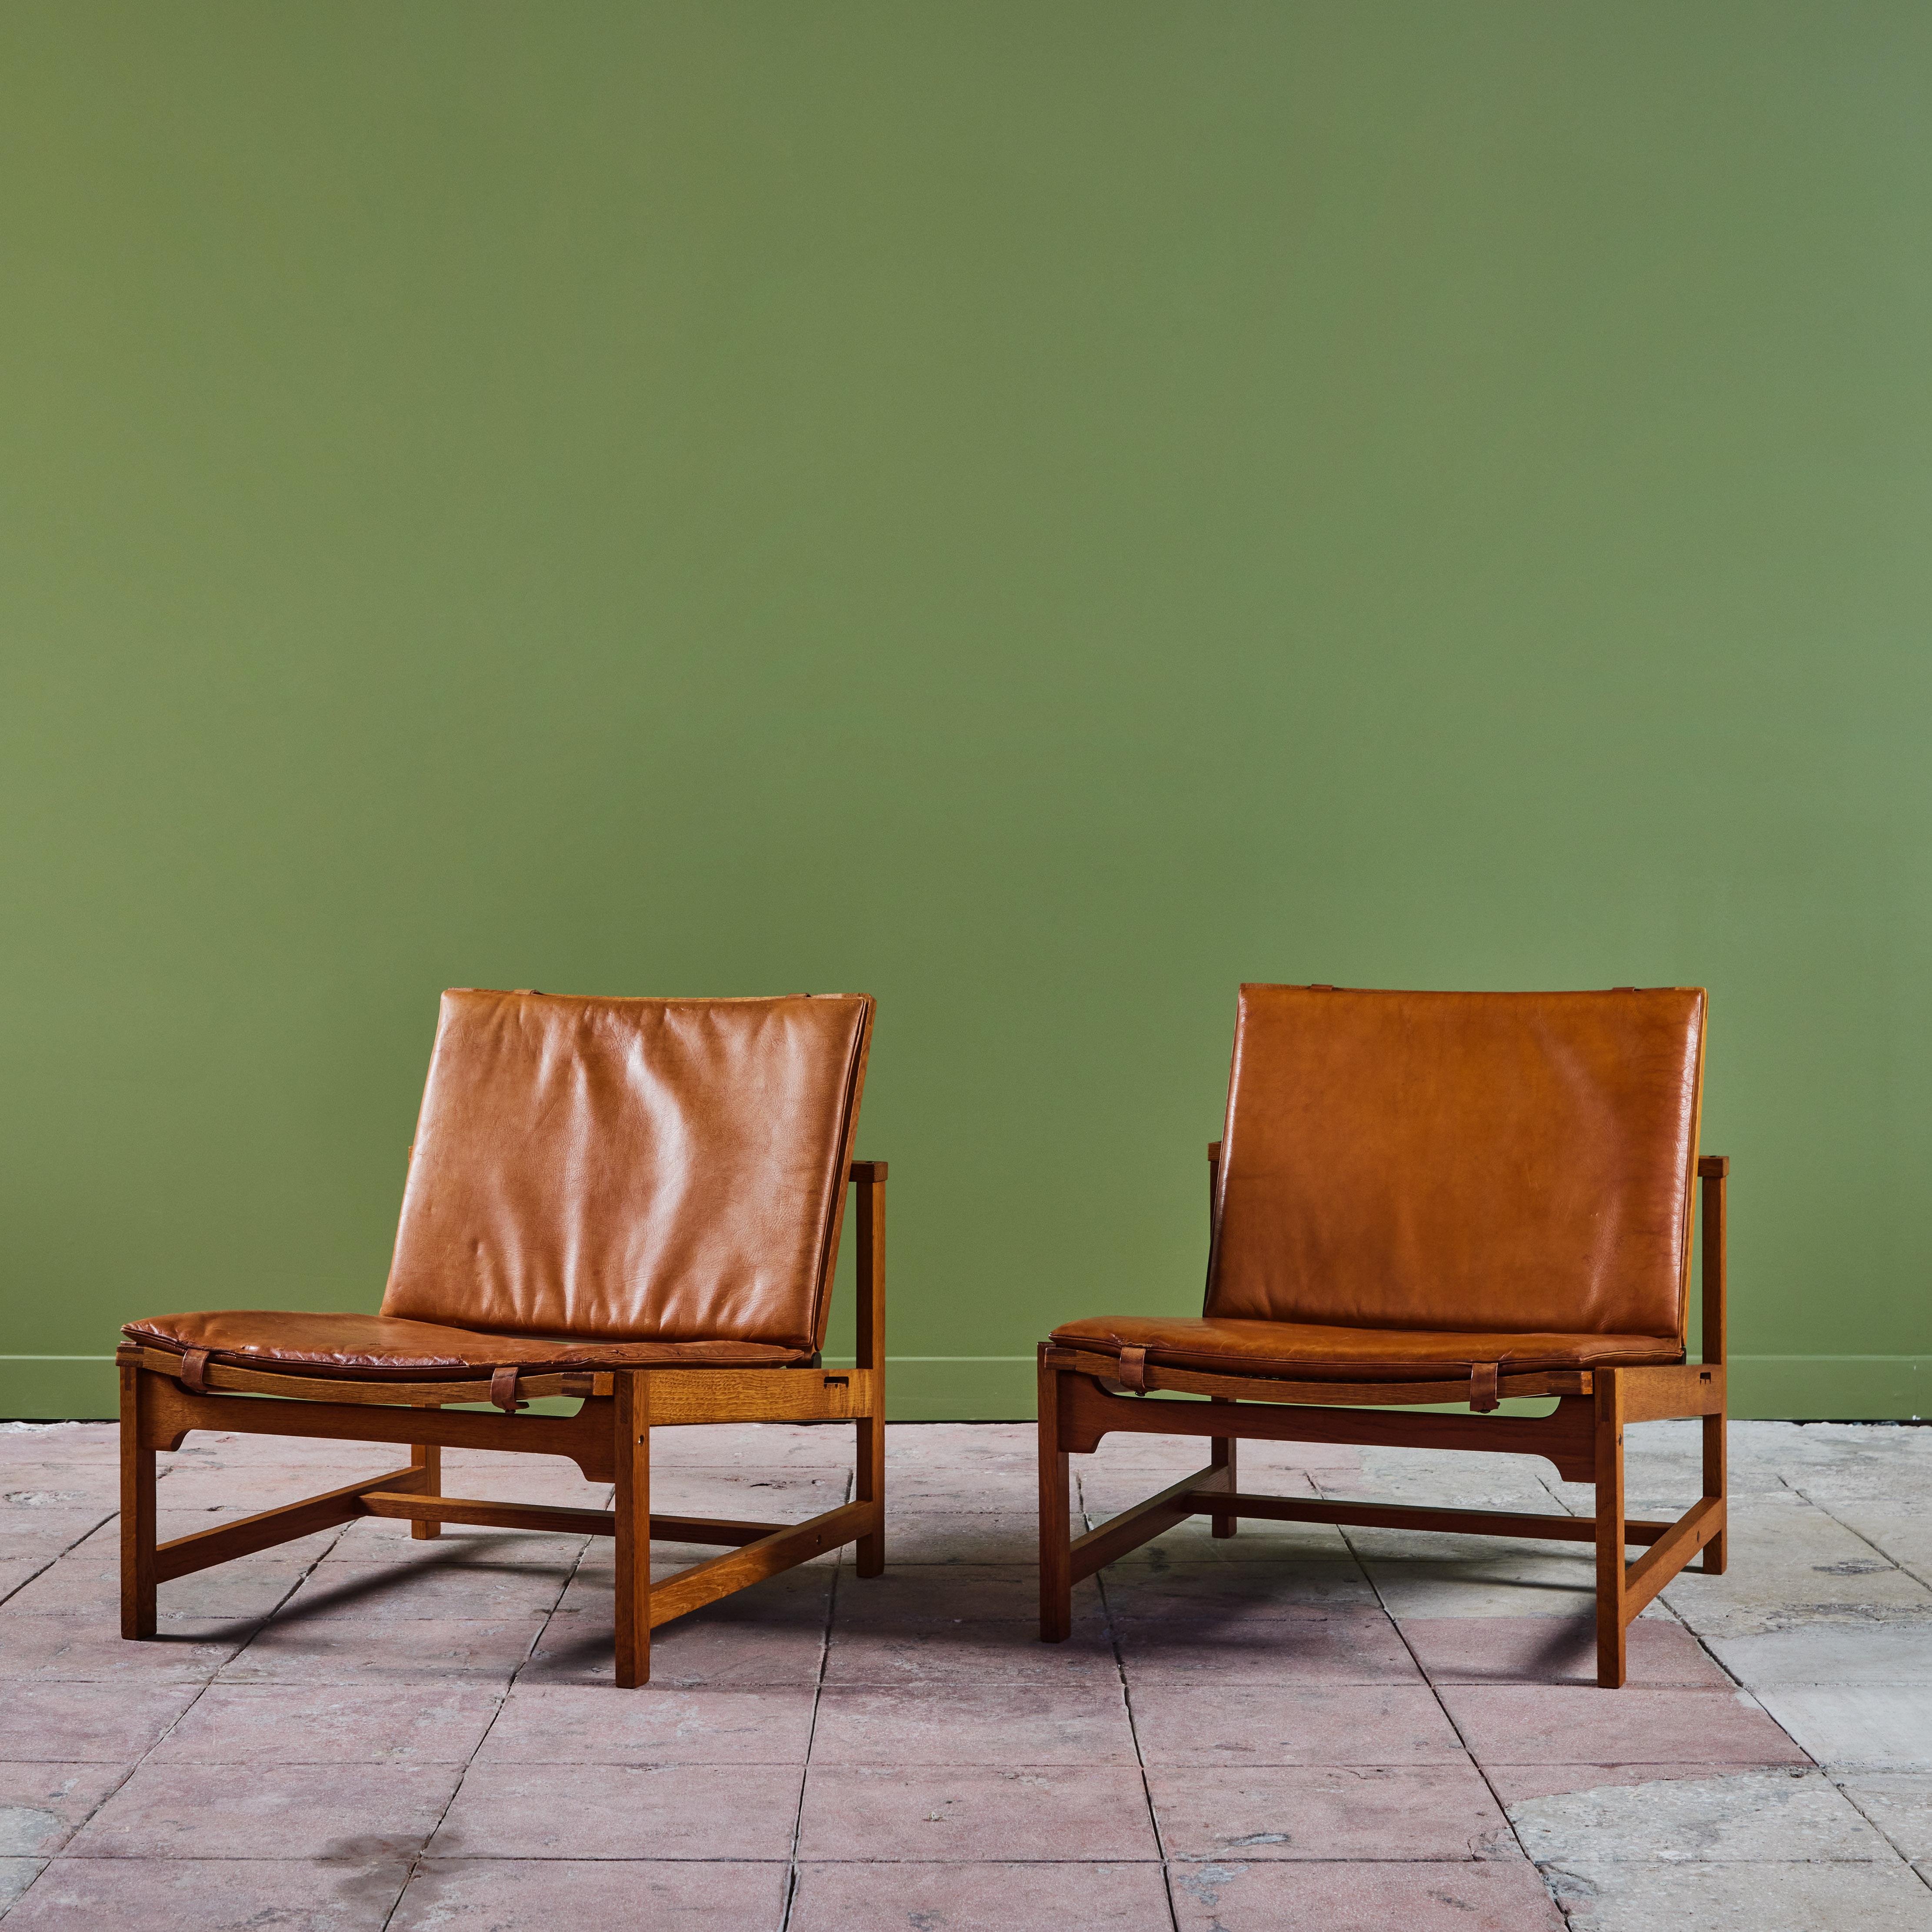 Pair of Arne Karlsen and Peter Hjort Leather and Cane Lounge Chairs 1